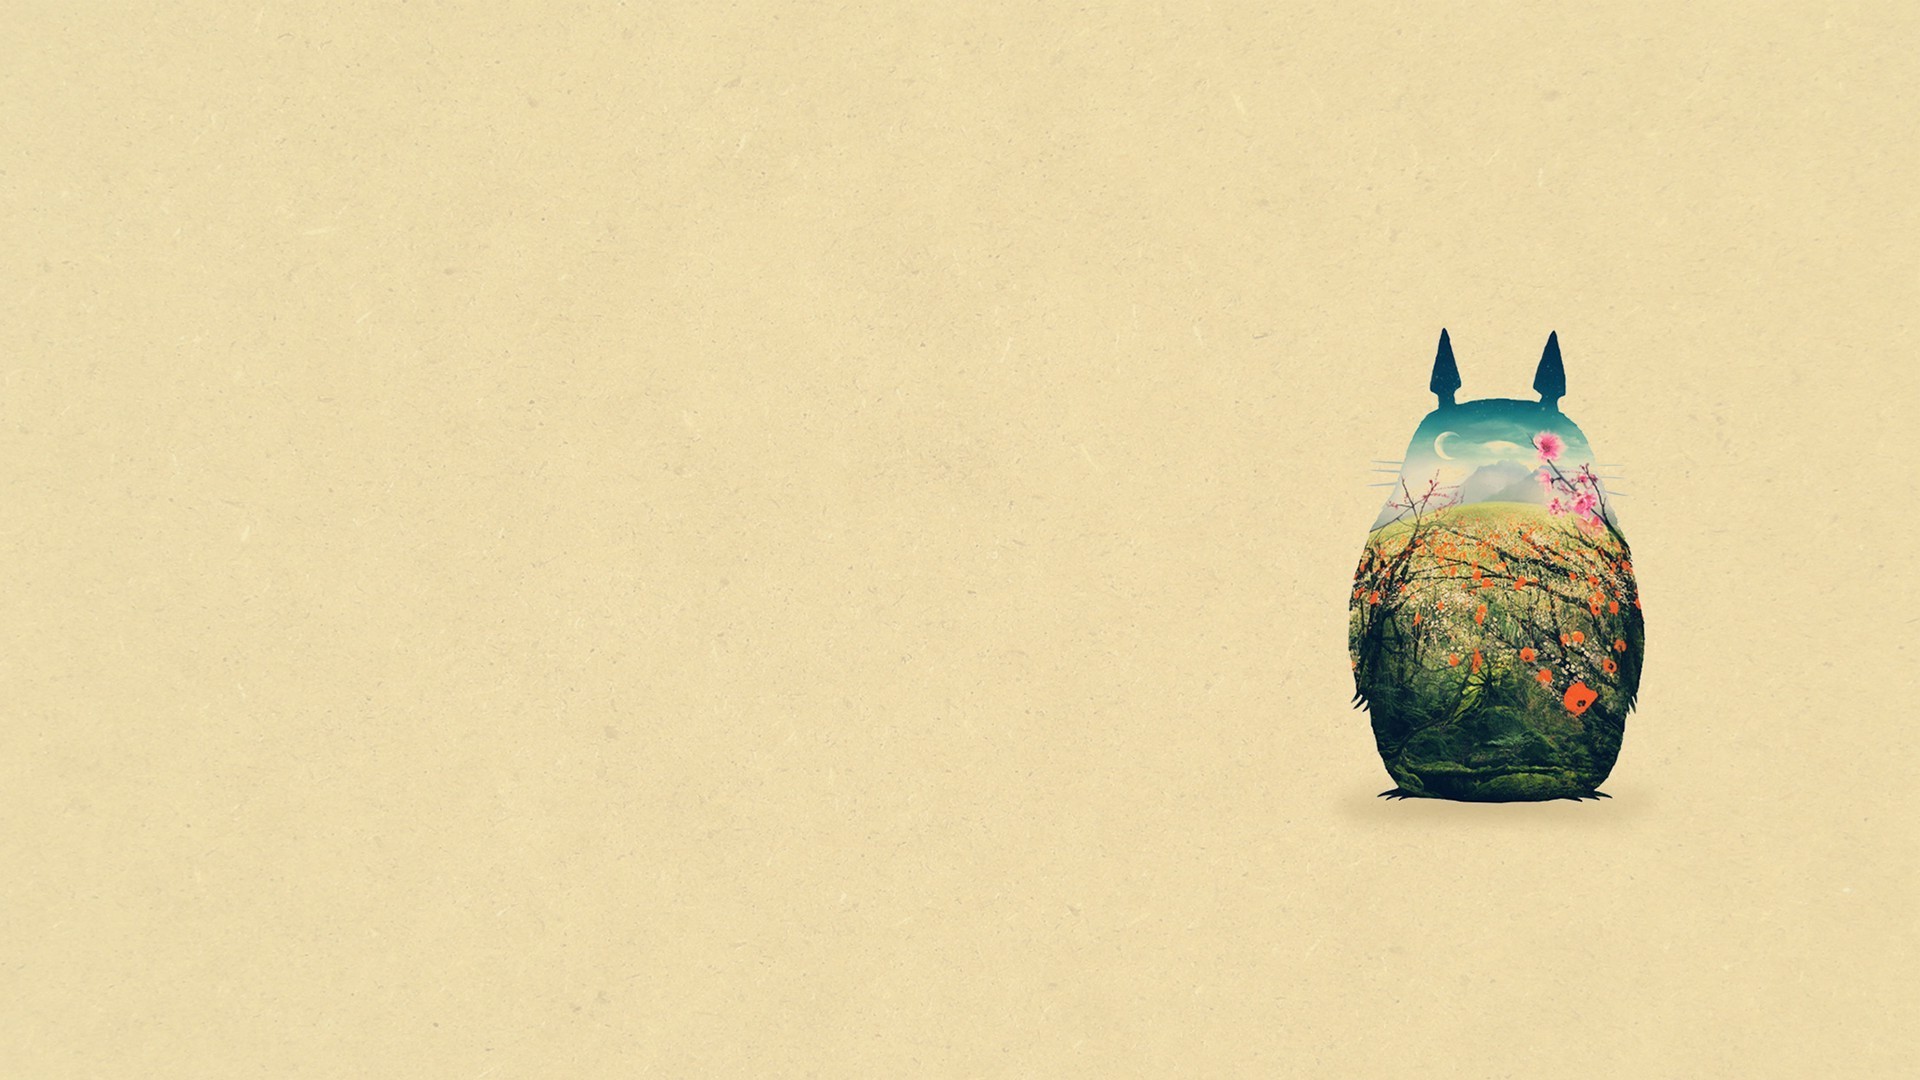 Totoro backgrounds free download